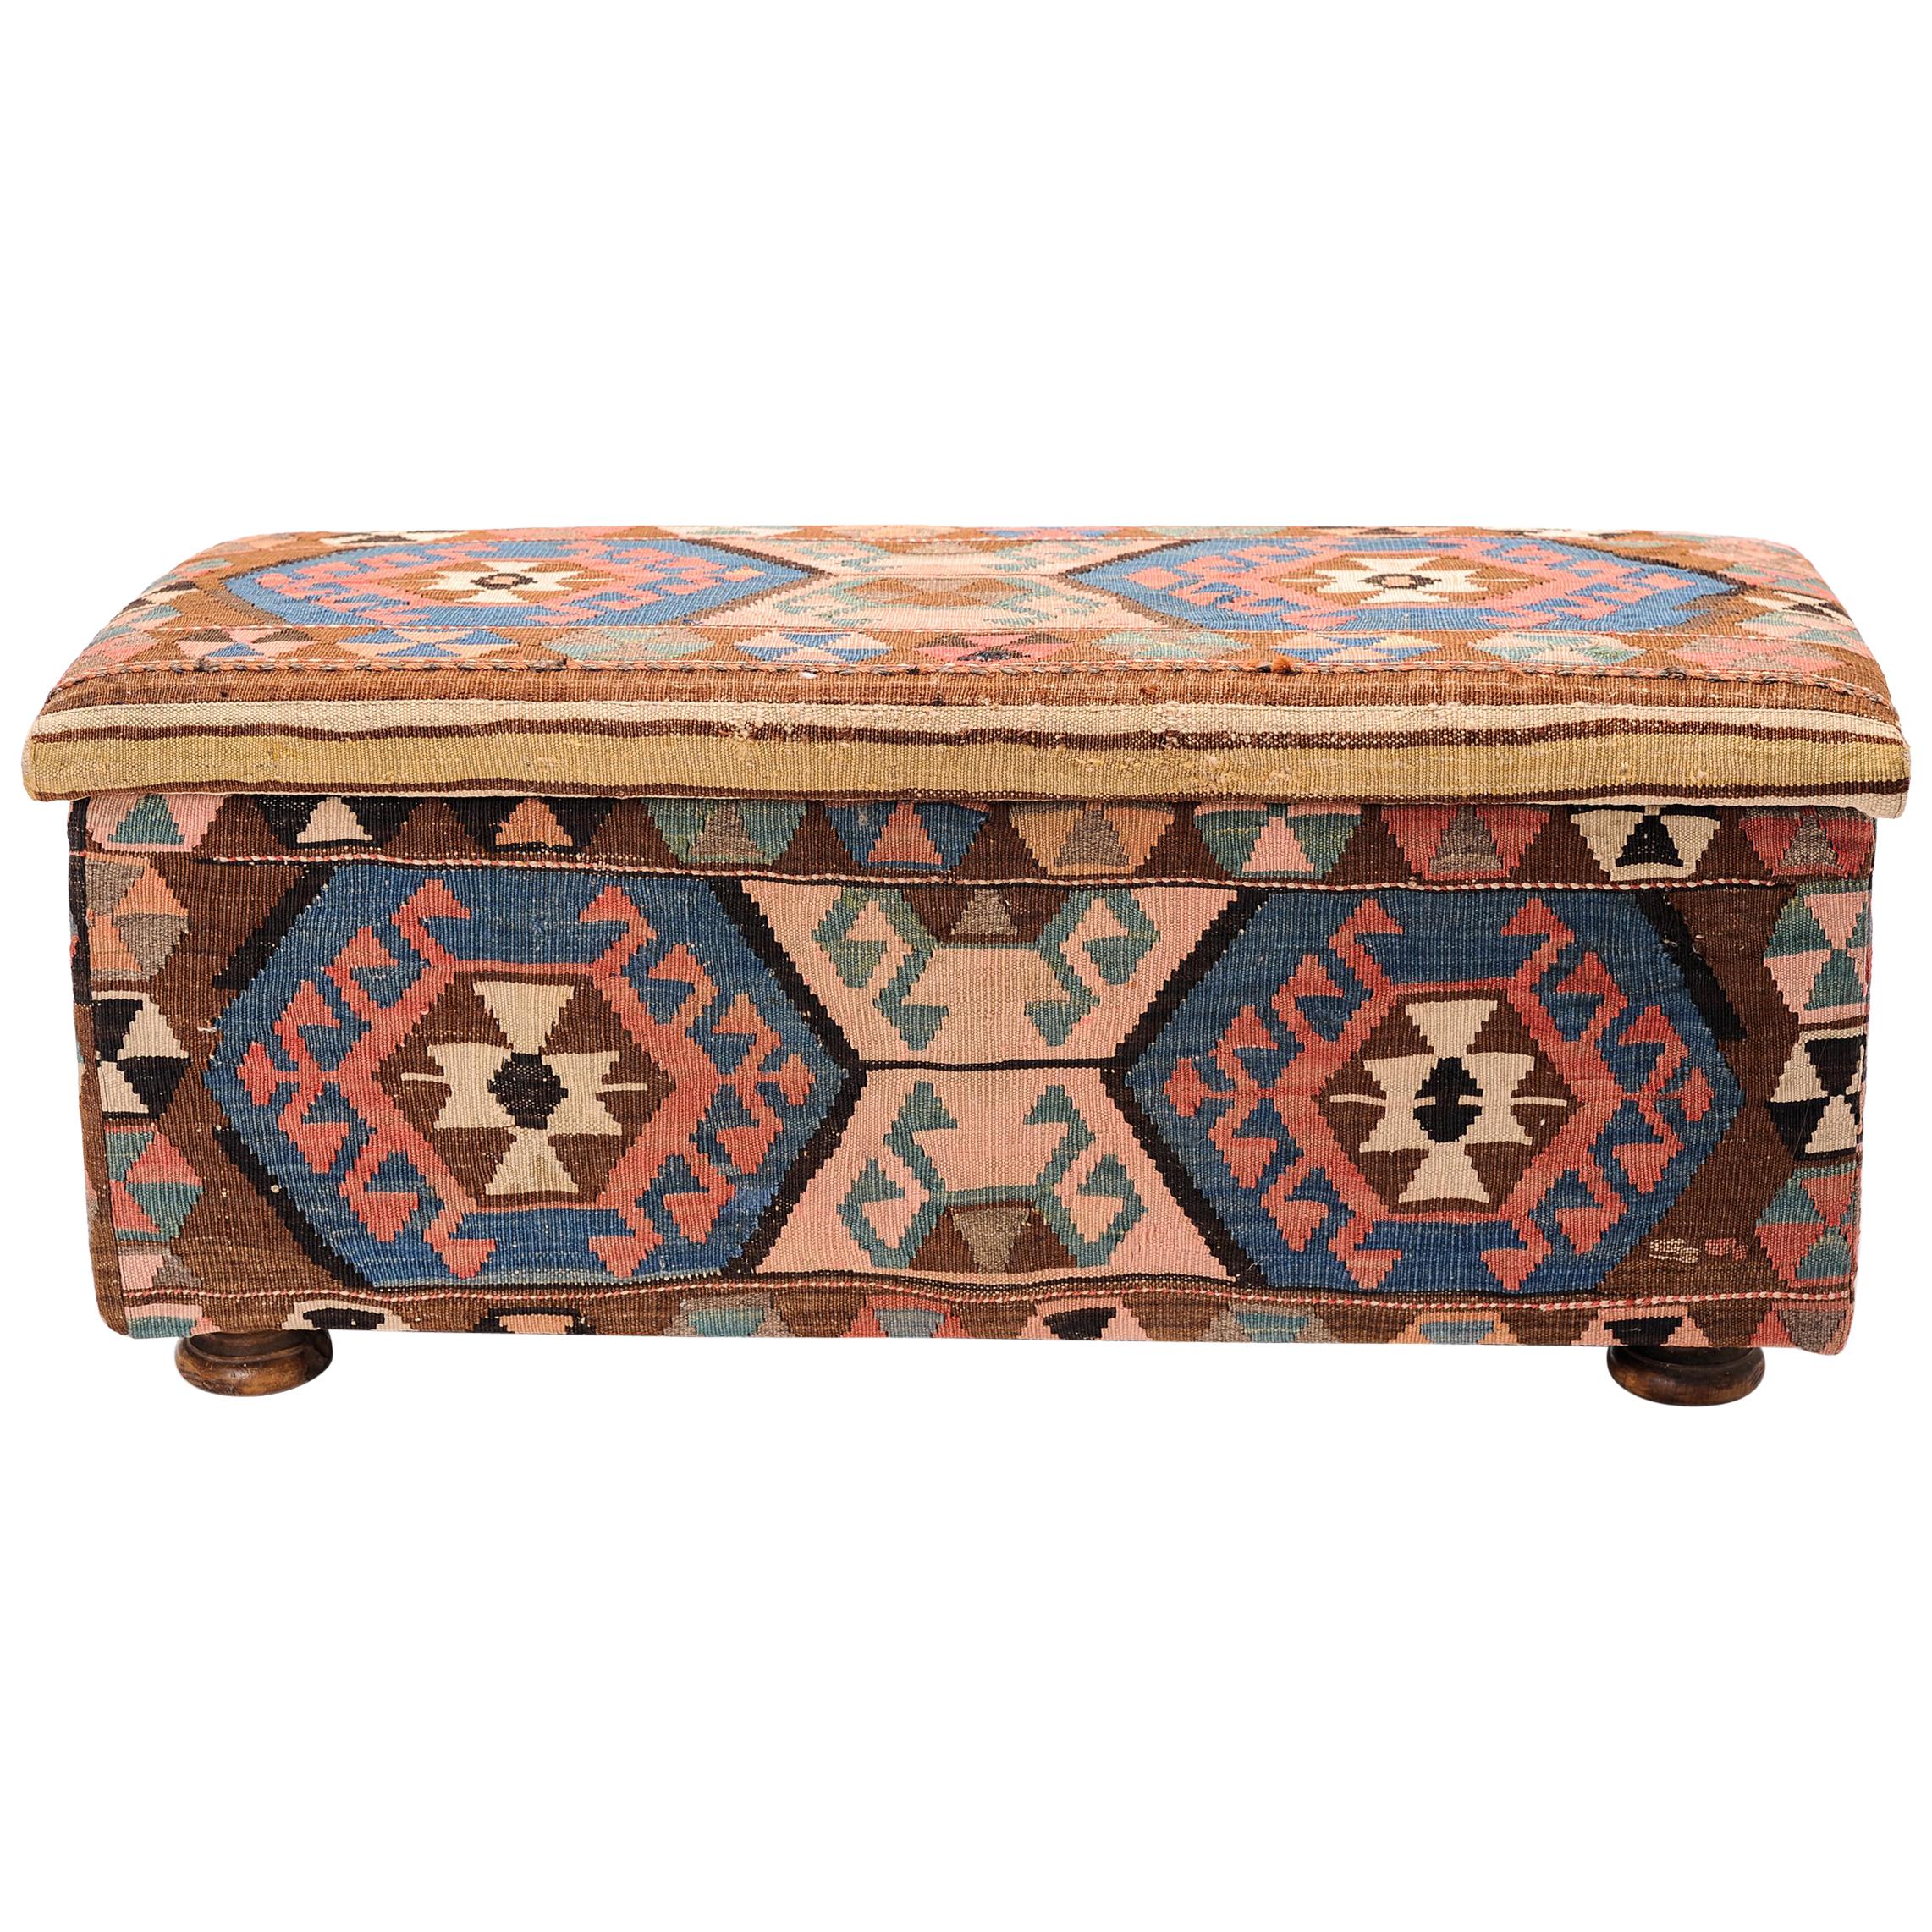 Chest or Trunk Upholstered with Old Shahsavan "Mafrash"